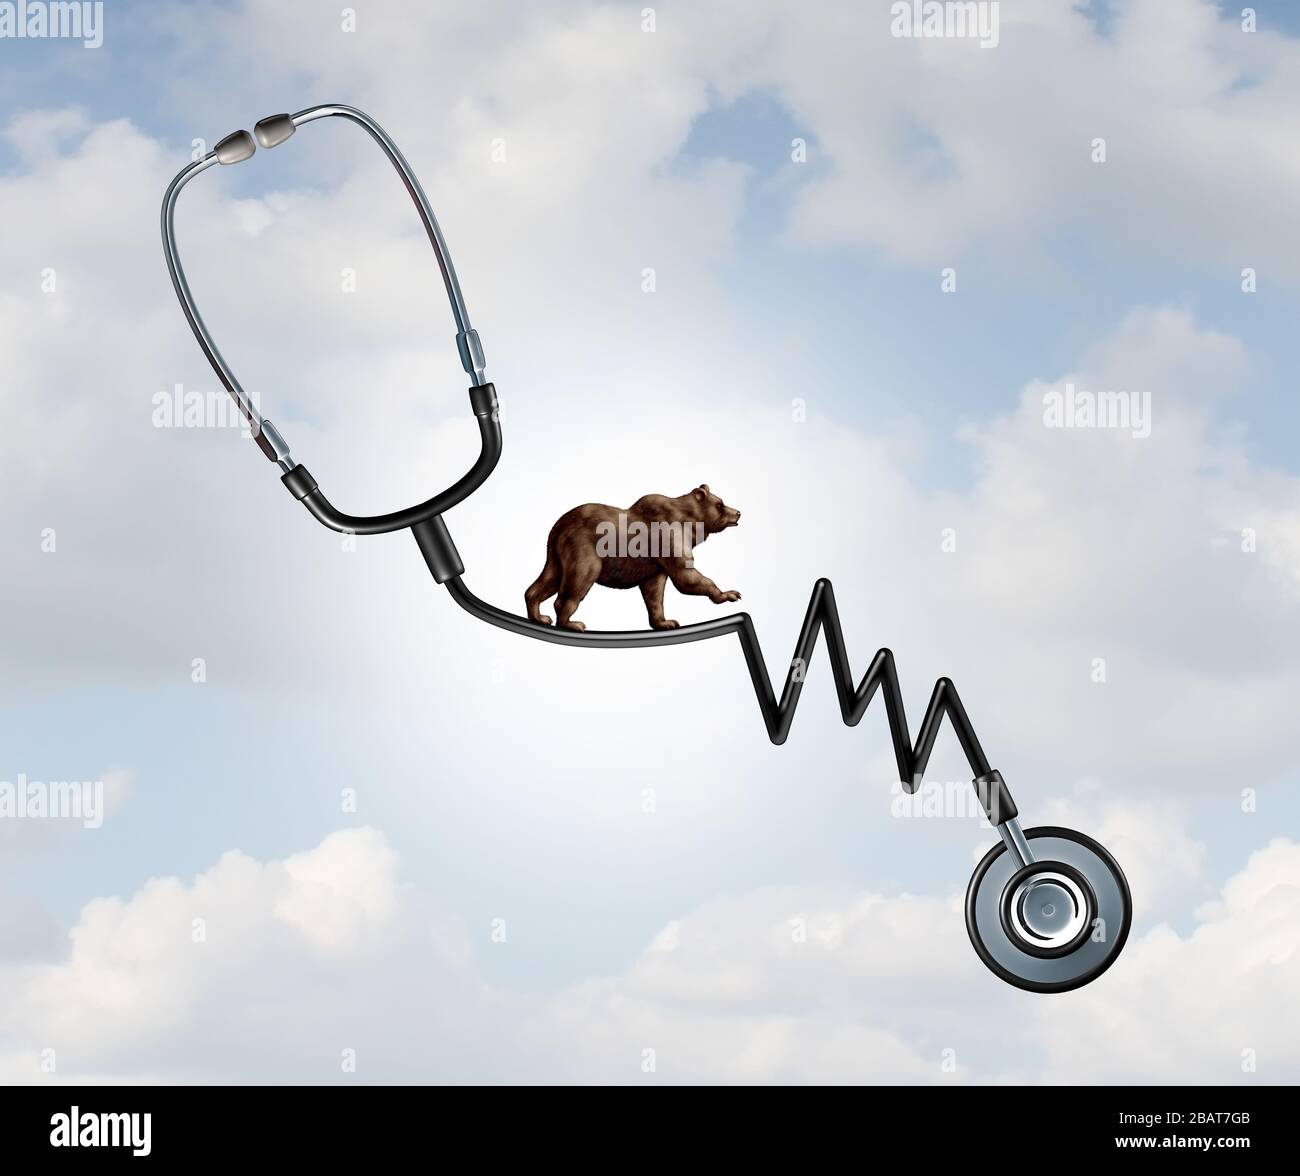 Health and Bear market risk as a financial loss concept as a symbol for disease and economic recession walking on a high tightrope shaped. Stock Photo